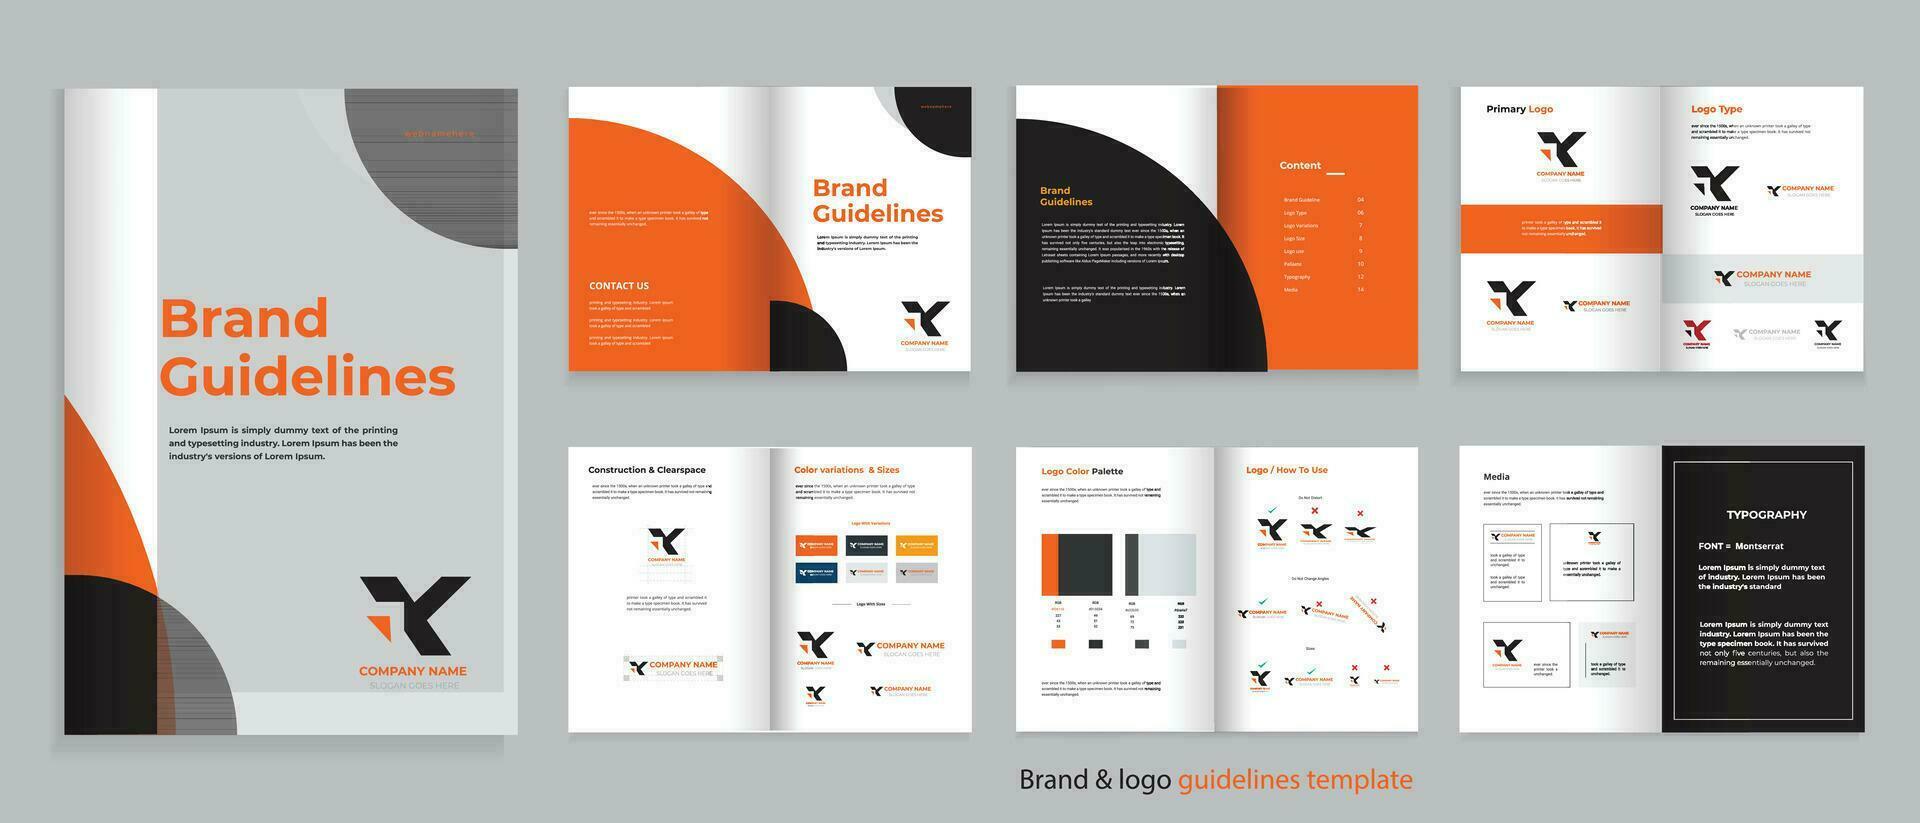 Brand guideline design, brand or logo guidelines template, a4 size professional template vector